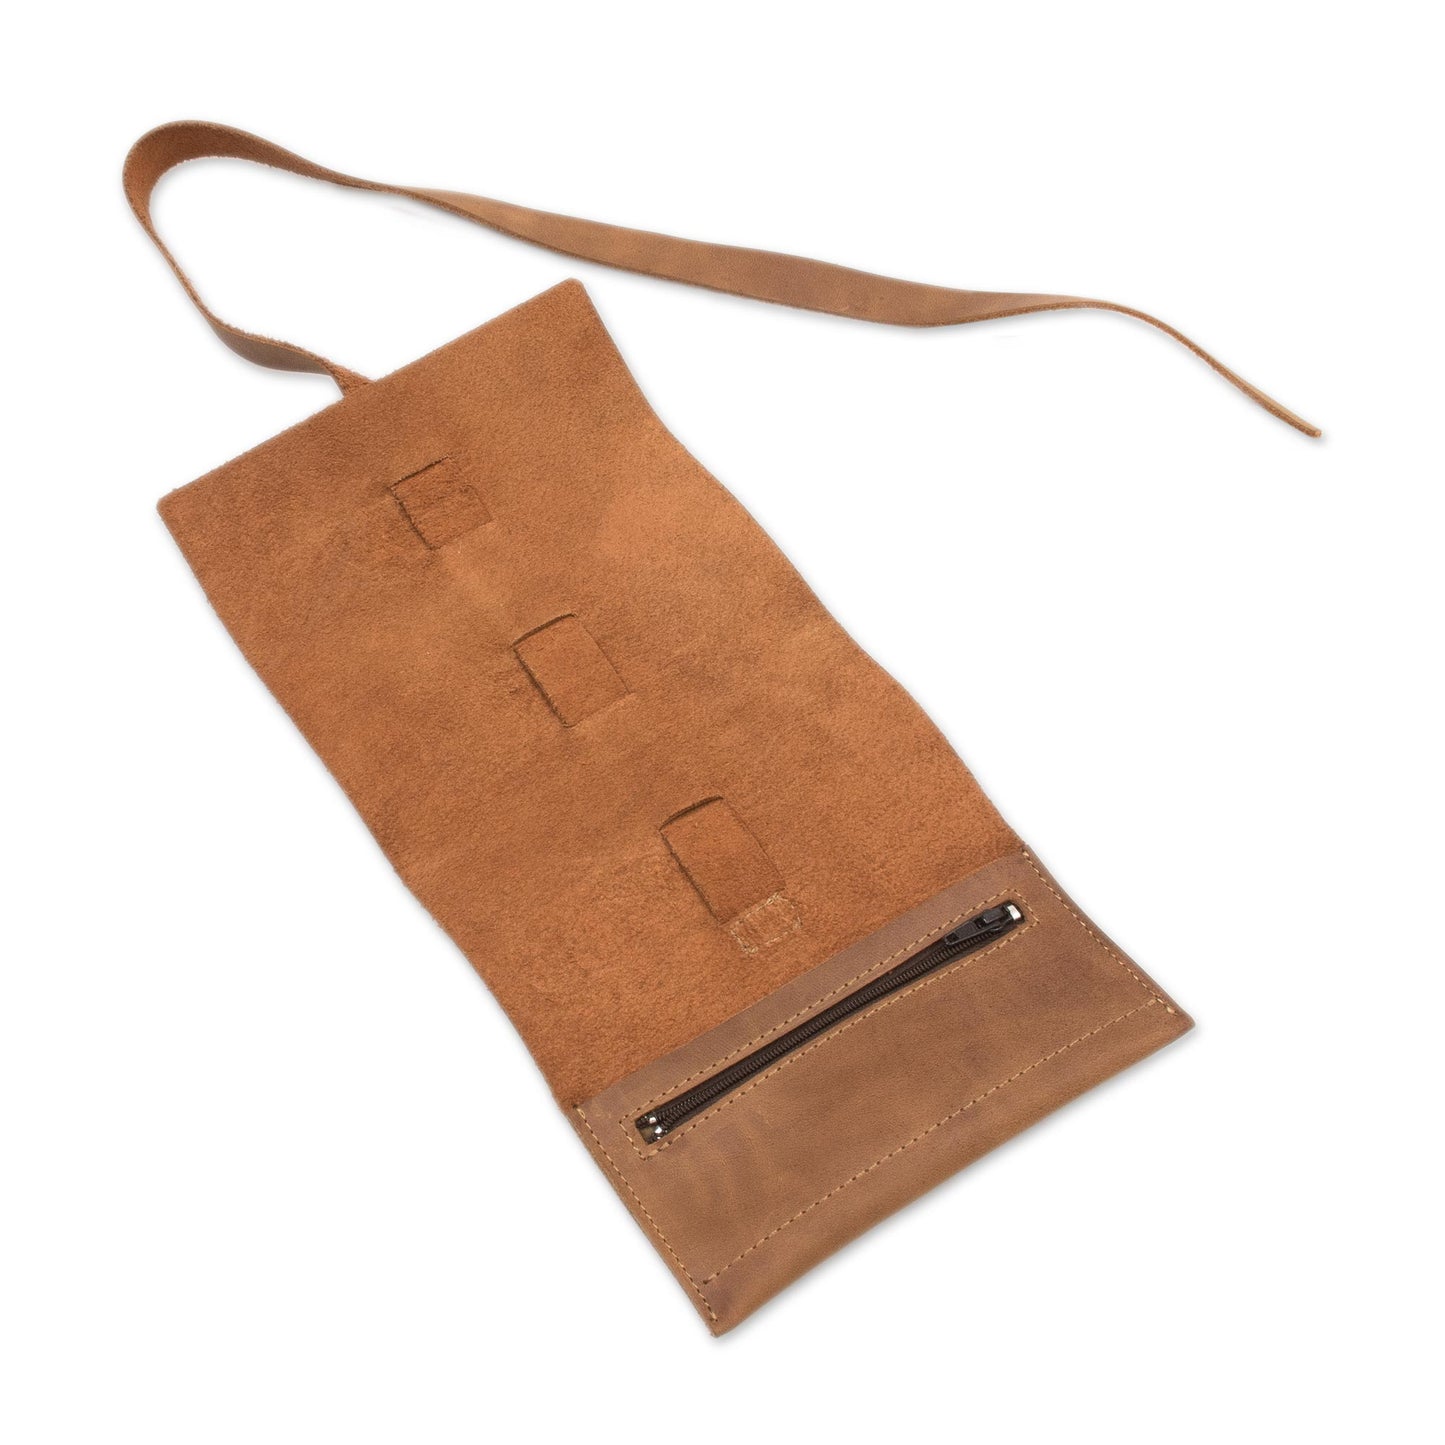 Rugged Modernity Handmade Leather Cable Case from Peru